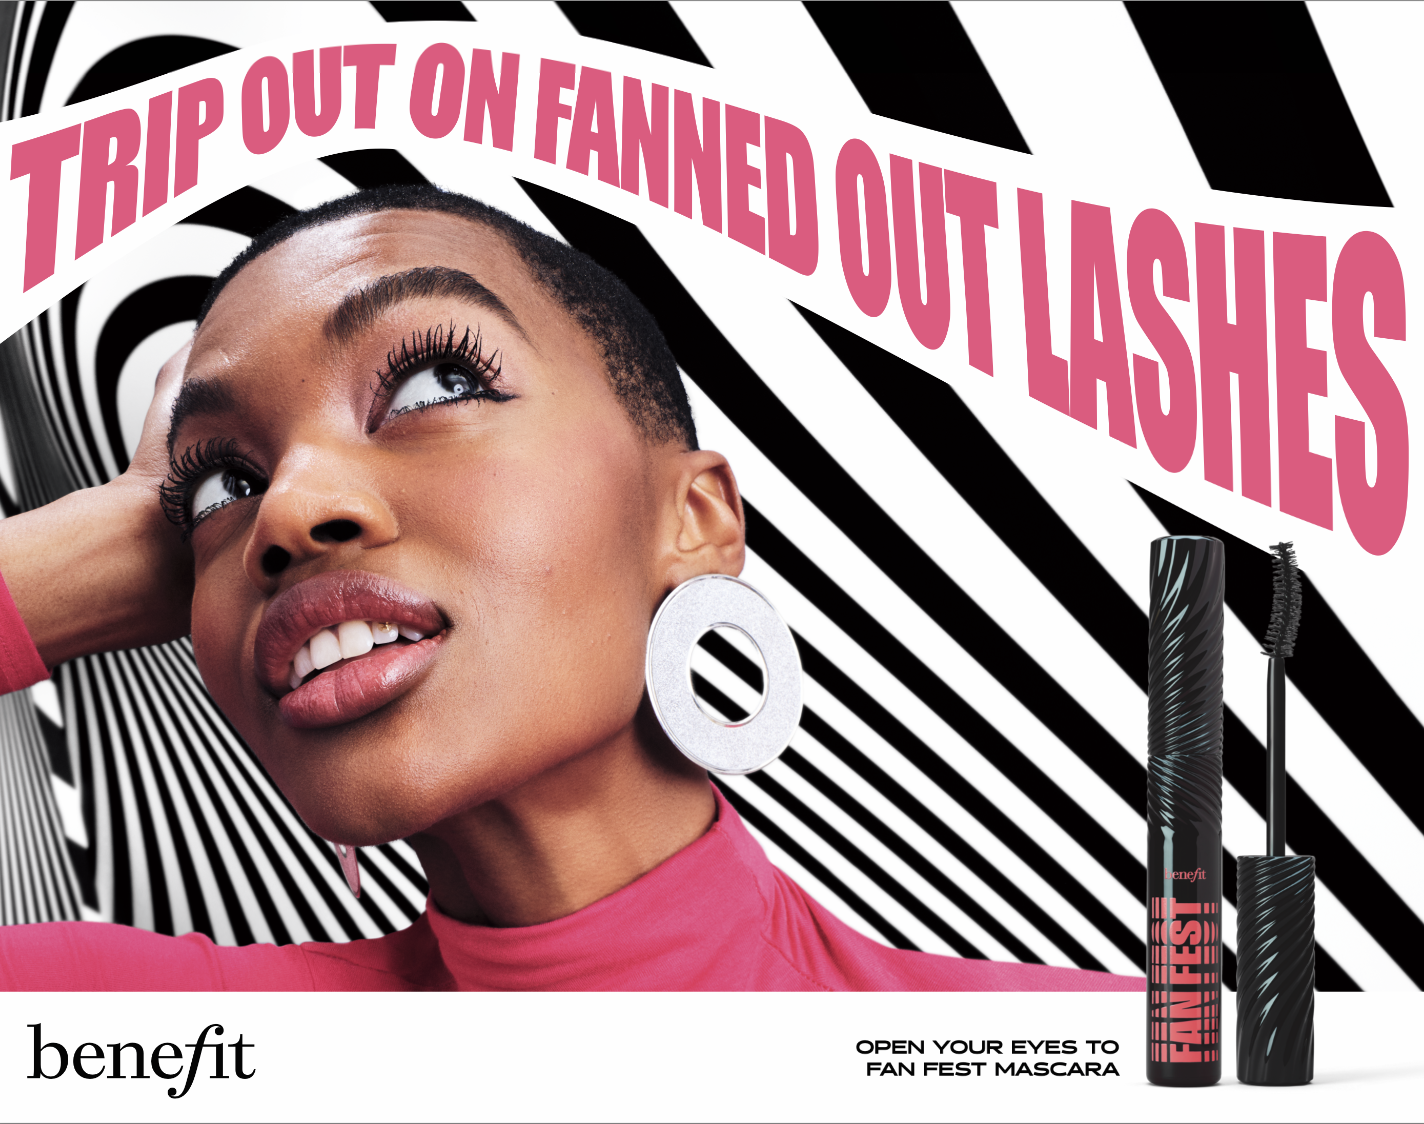 Benefit goes big on TikTok Shopping for its new mascara launch